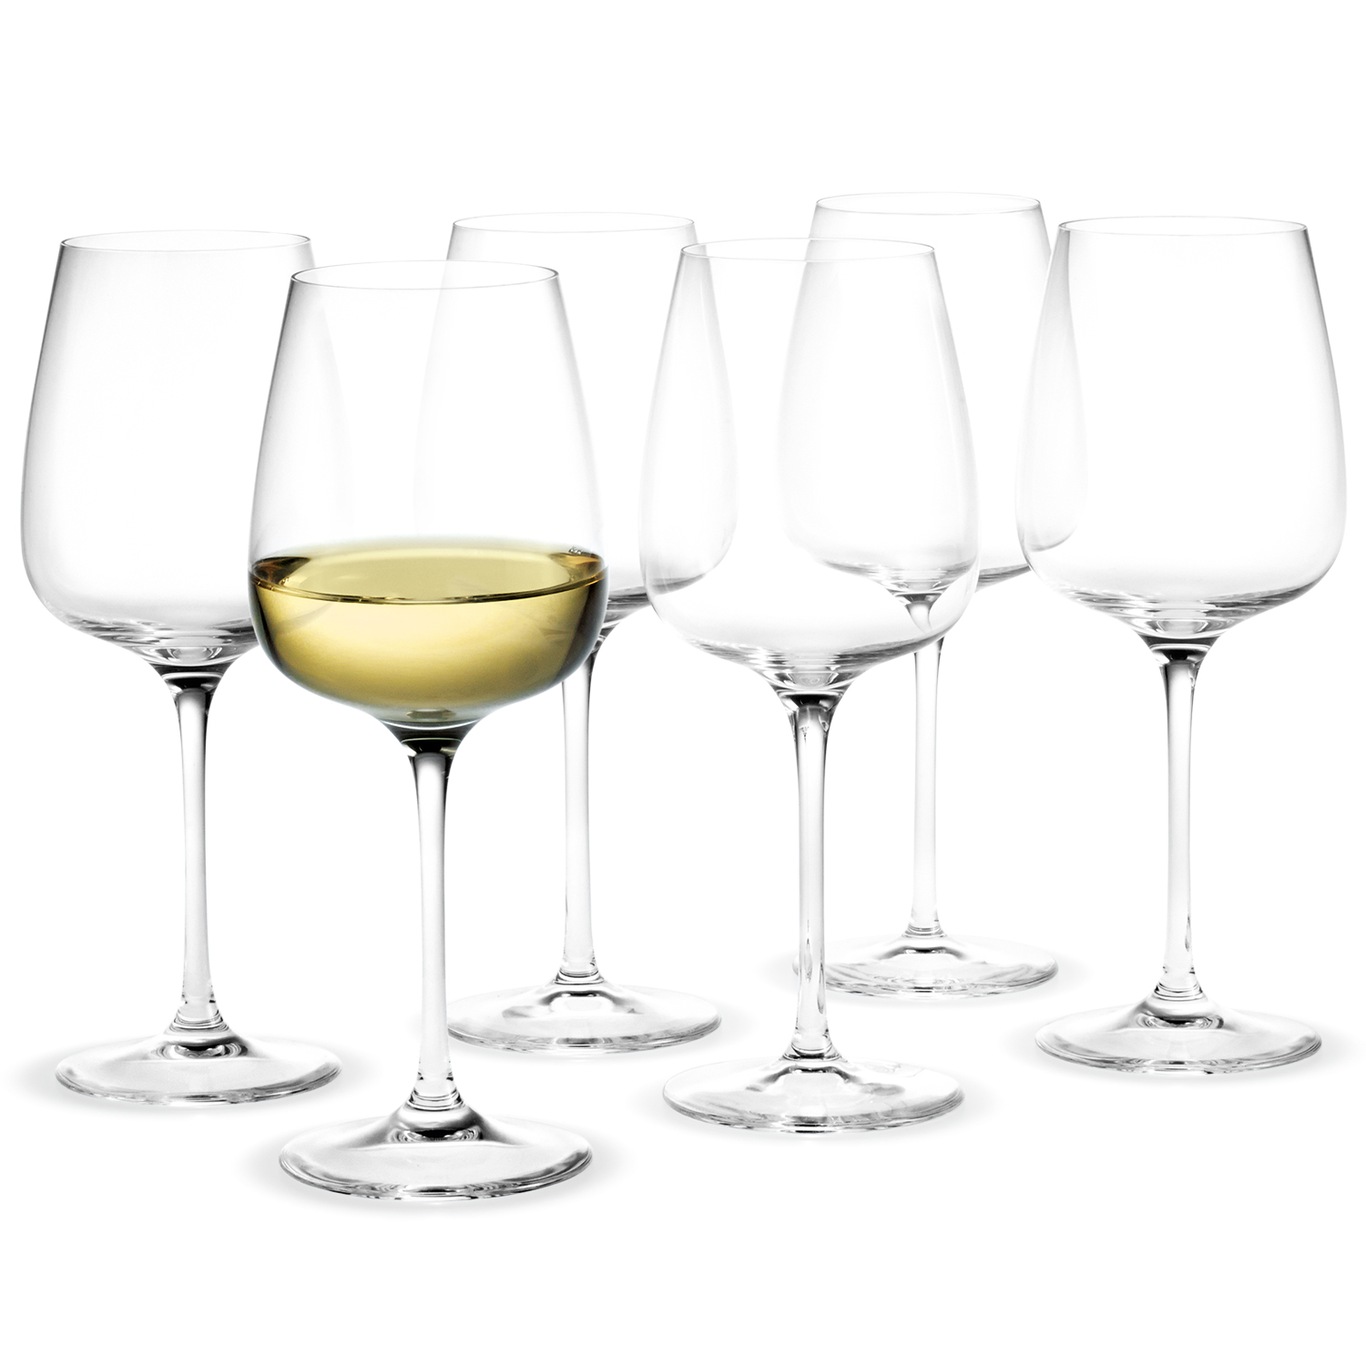 Bouquet Sweet Wine Glasses 6-pack, 32 cl